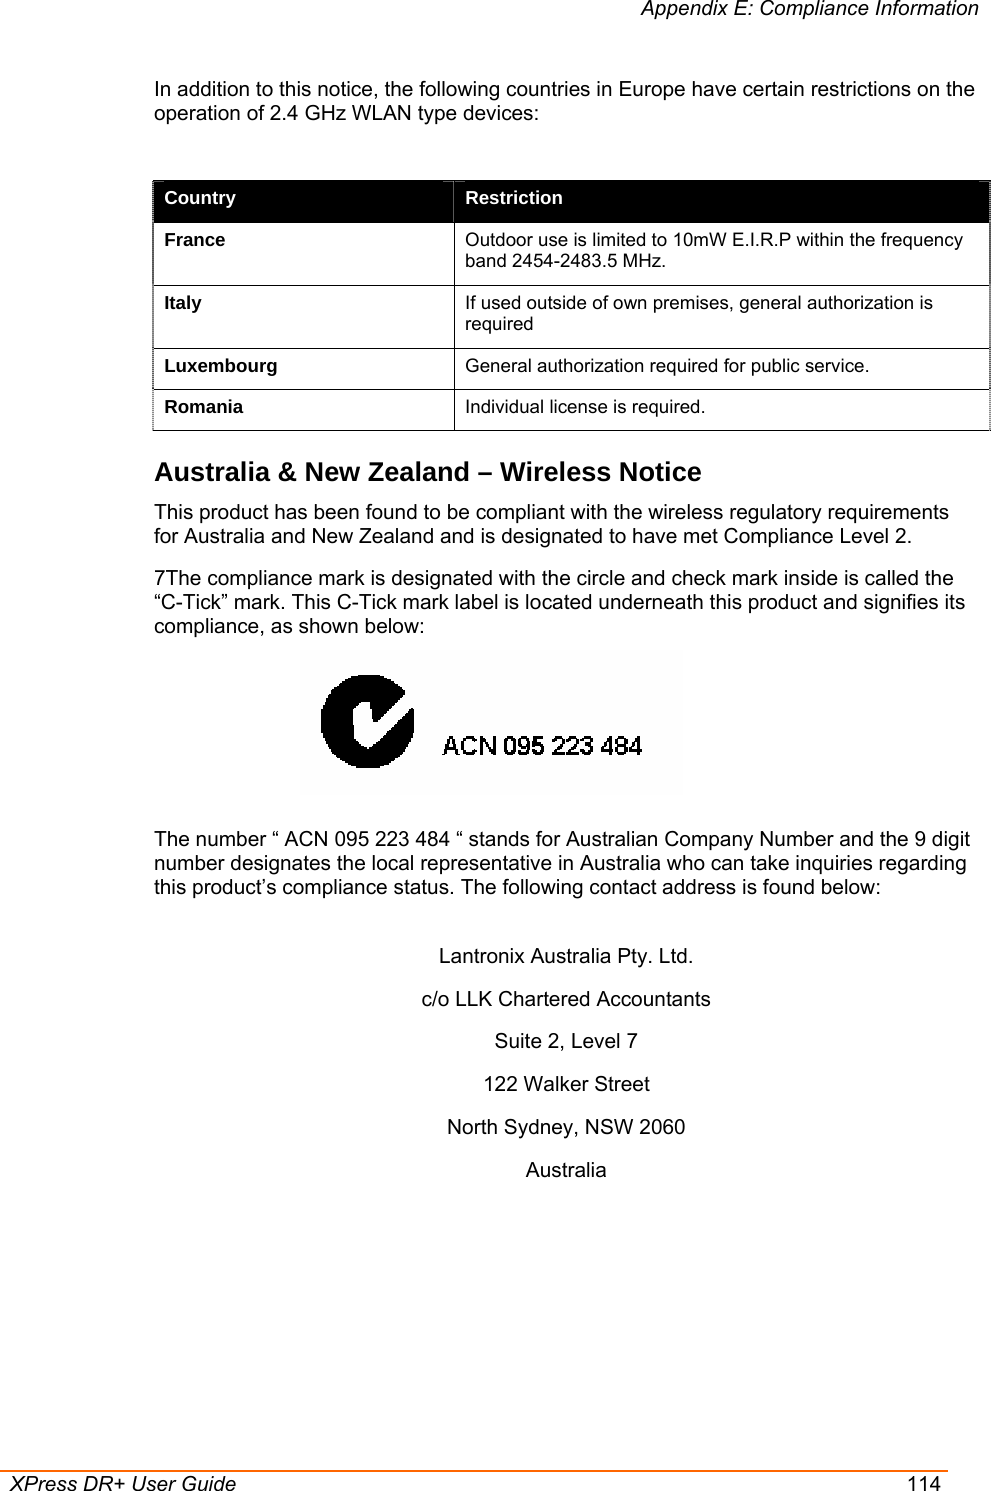 Appendix E: Compliance Information  XPress DR+ User Guide  114 In addition to this notice, the following countries in Europe have certain restrictions on the operation of 2.4 GHz WLAN type devices:  Country  Restriction France  Outdoor use is limited to 10mW E.I.R.P within the frequency band 2454-2483.5 MHz. Italy  If used outside of own premises, general authorization is required Luxembourg  General authorization required for public service. Romania  Individual license is required. Australia &amp; New Zealand – Wireless Notice This product has been found to be compliant with the wireless regulatory requirements for Australia and New Zealand and is designated to have met Compliance Level 2.  7The compliance mark is designated with the circle and check mark inside is called the “C-Tick” mark. This C-Tick mark label is located underneath this product and signifies its compliance, as shown below:   The number “ ACN 095 223 484 “ stands for Australian Company Number and the 9 digit number designates the local representative in Australia who can take inquiries regarding this product’s compliance status. The following contact address is found below:  Lantronix Australia Pty. Ltd. c/o LLK Chartered Accountants Suite 2, Level 7 122 Walker Street North Sydney, NSW 2060 Australia 